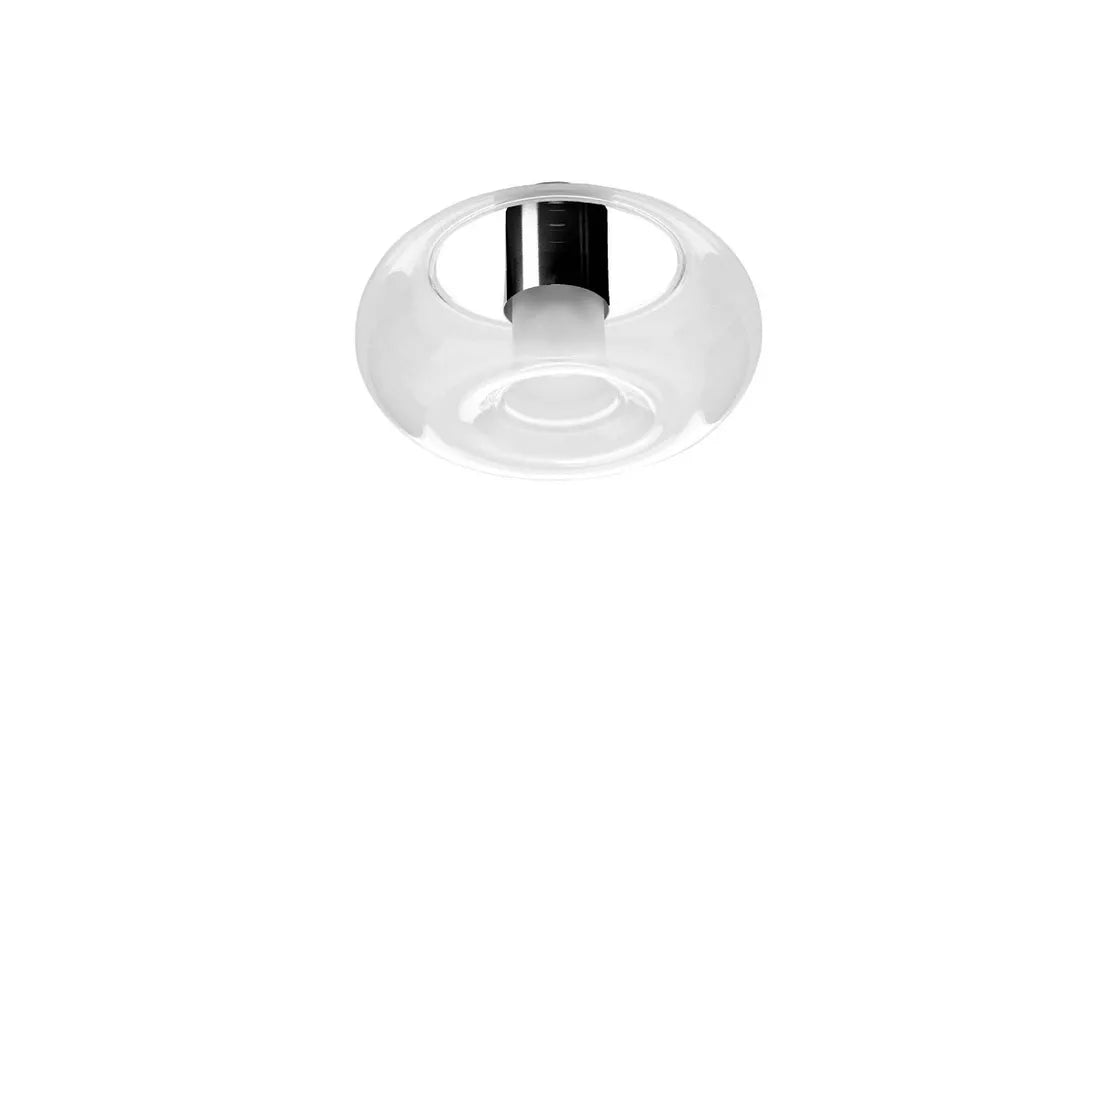 wash basin lights, wall ceiling light, wall ceiling light design, wall lamps online, bathroom wall lights in borosilicate glass.